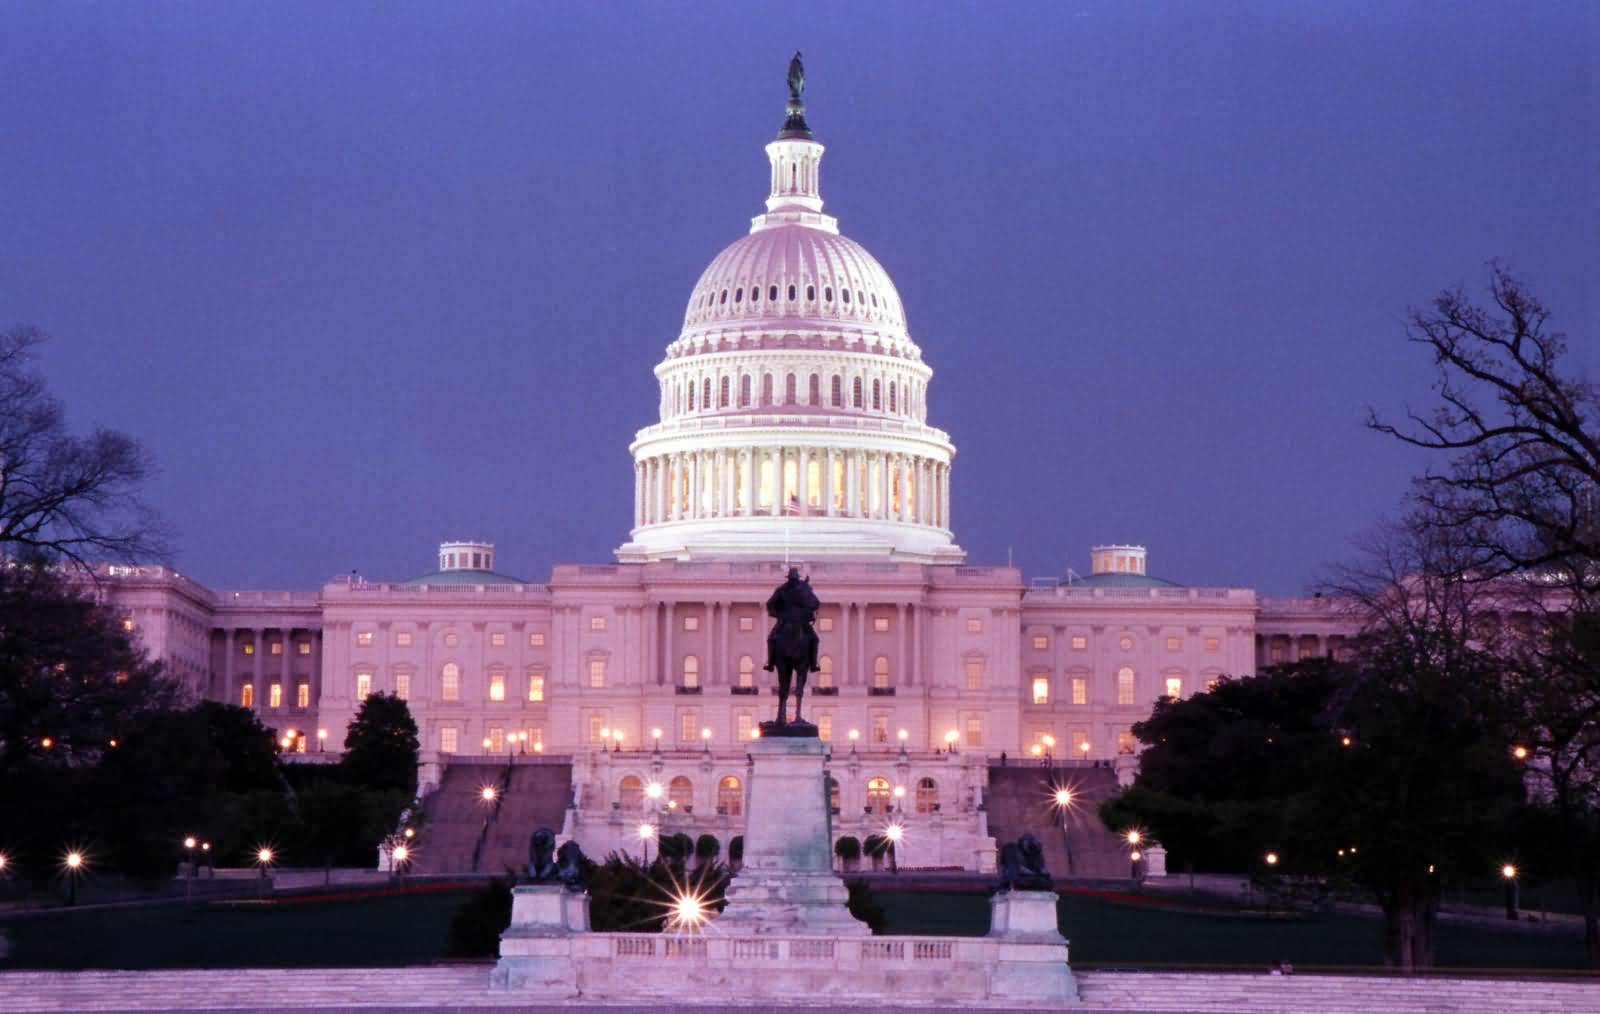 Night Picture Of United States Capitol